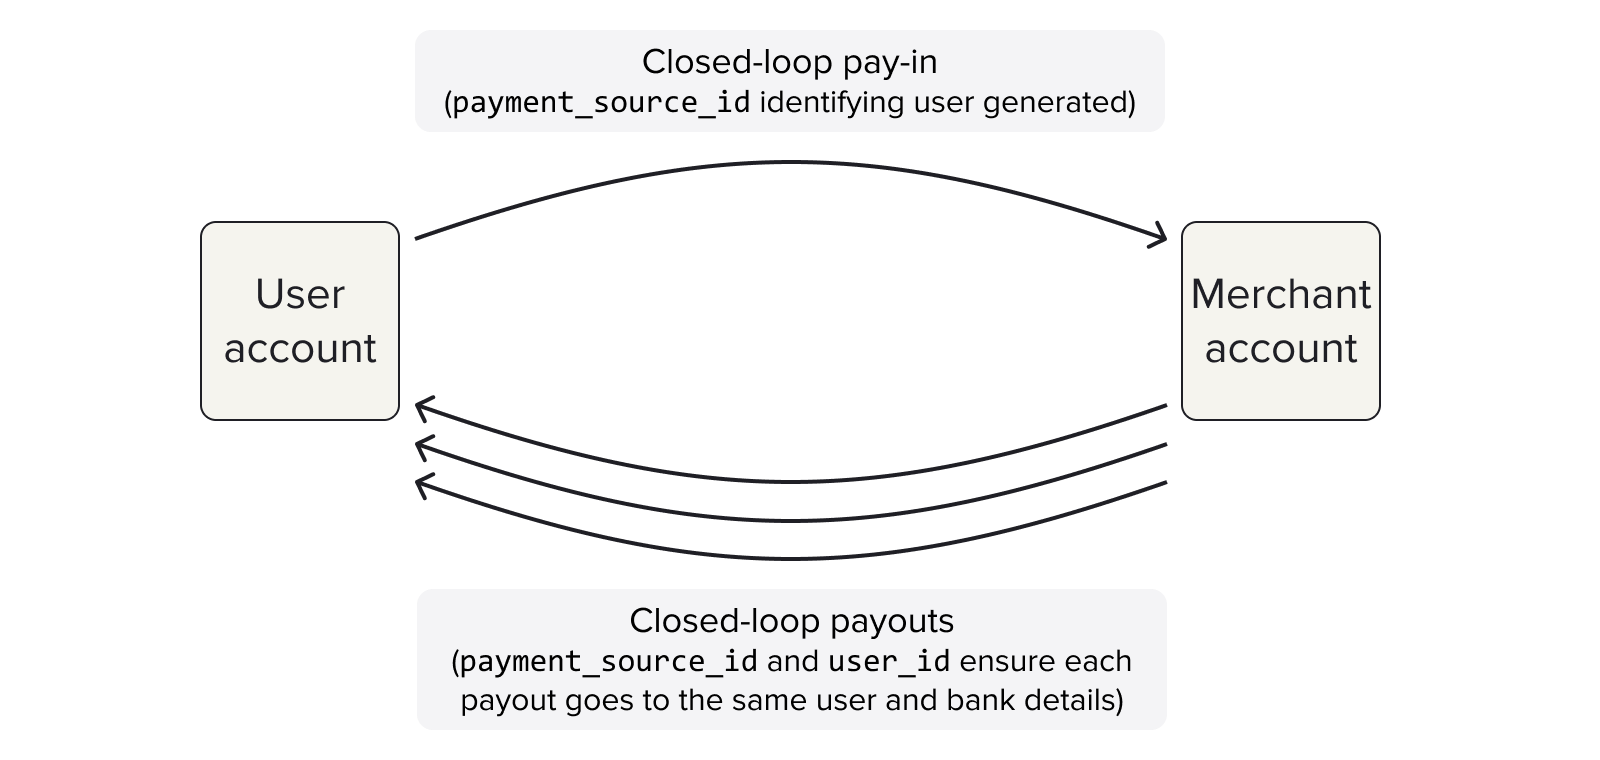 After a closed-loop pay-in, you can can easily make multiple payouts to the same user, and also access other merchant account-related functionality.